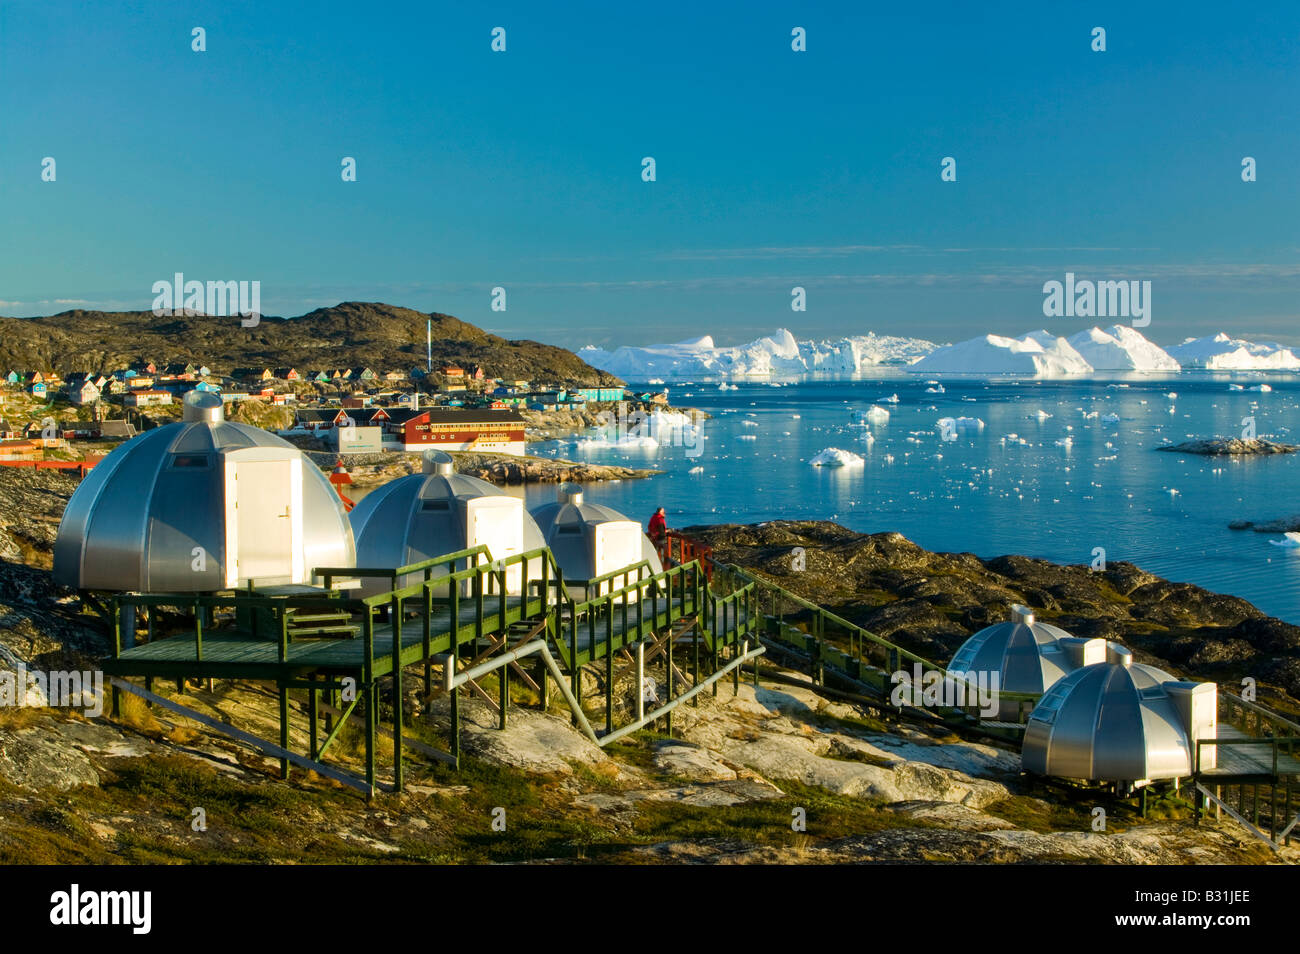 Igloos in the grounds of Hotel Arctic in Ilulissat Greenland Stock Photo -  Alamy